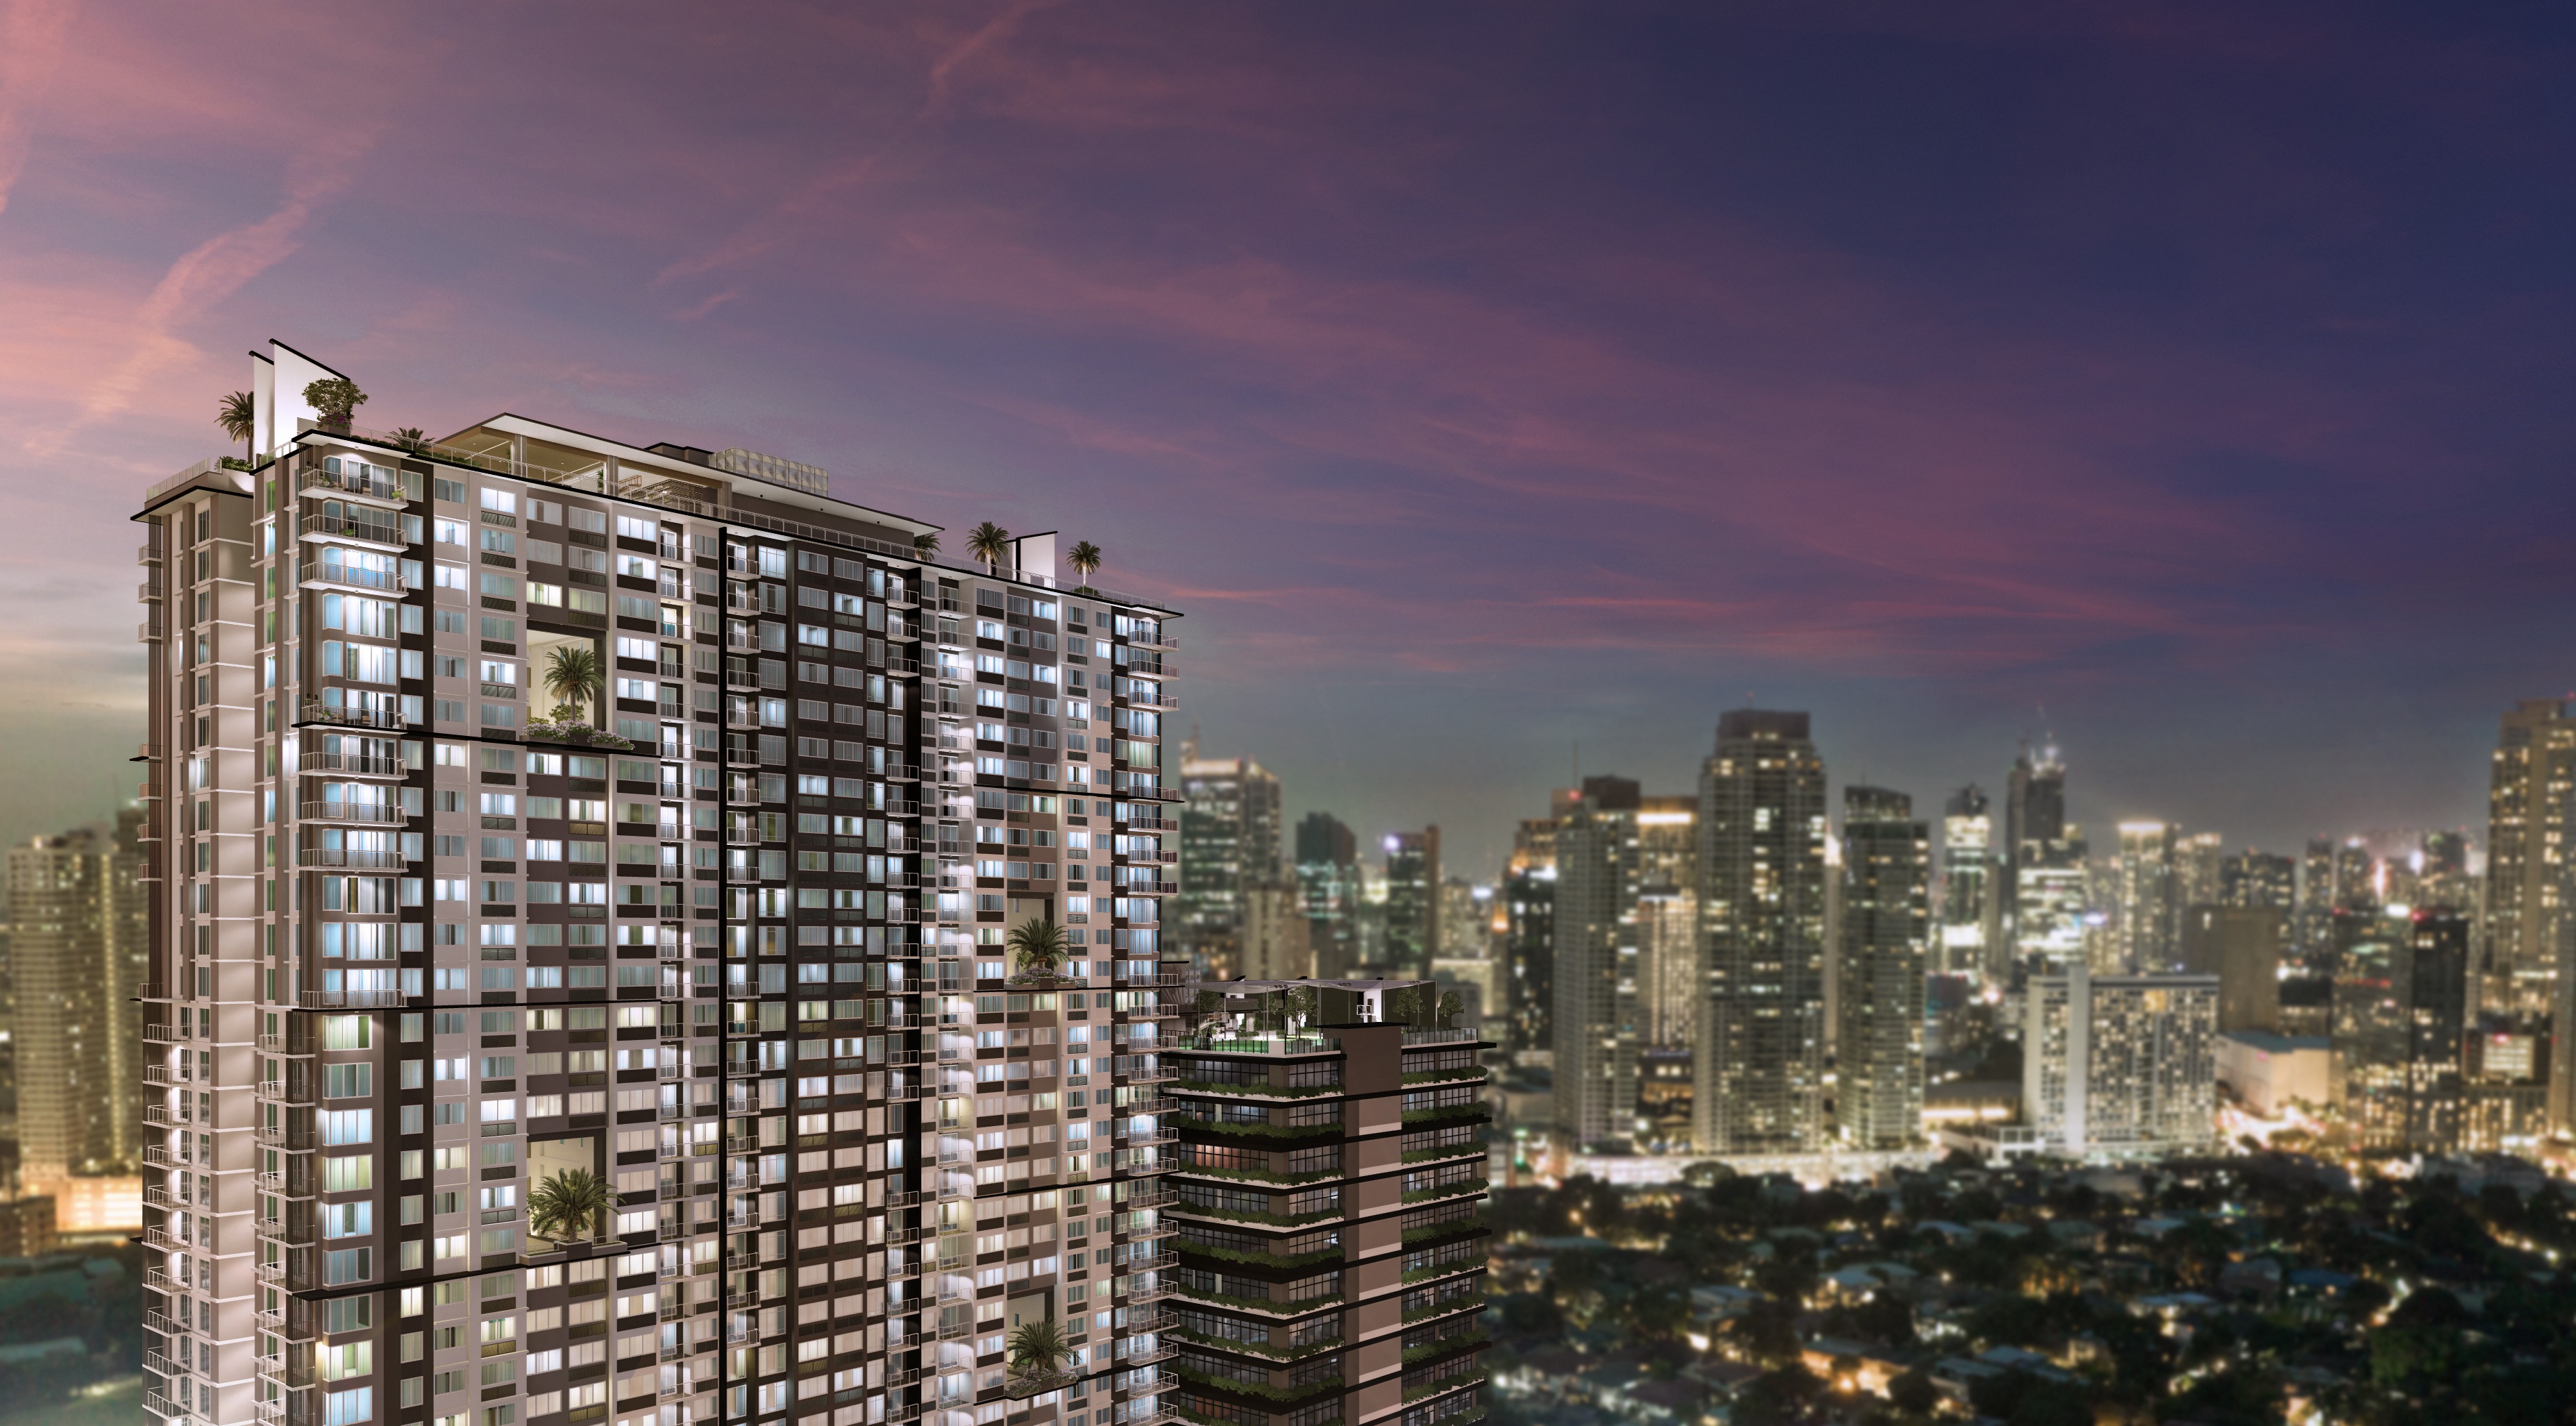 invest-in-the-future-the-makati-southwest-gateway-is-the-citys-next-big-thing-1686042549807